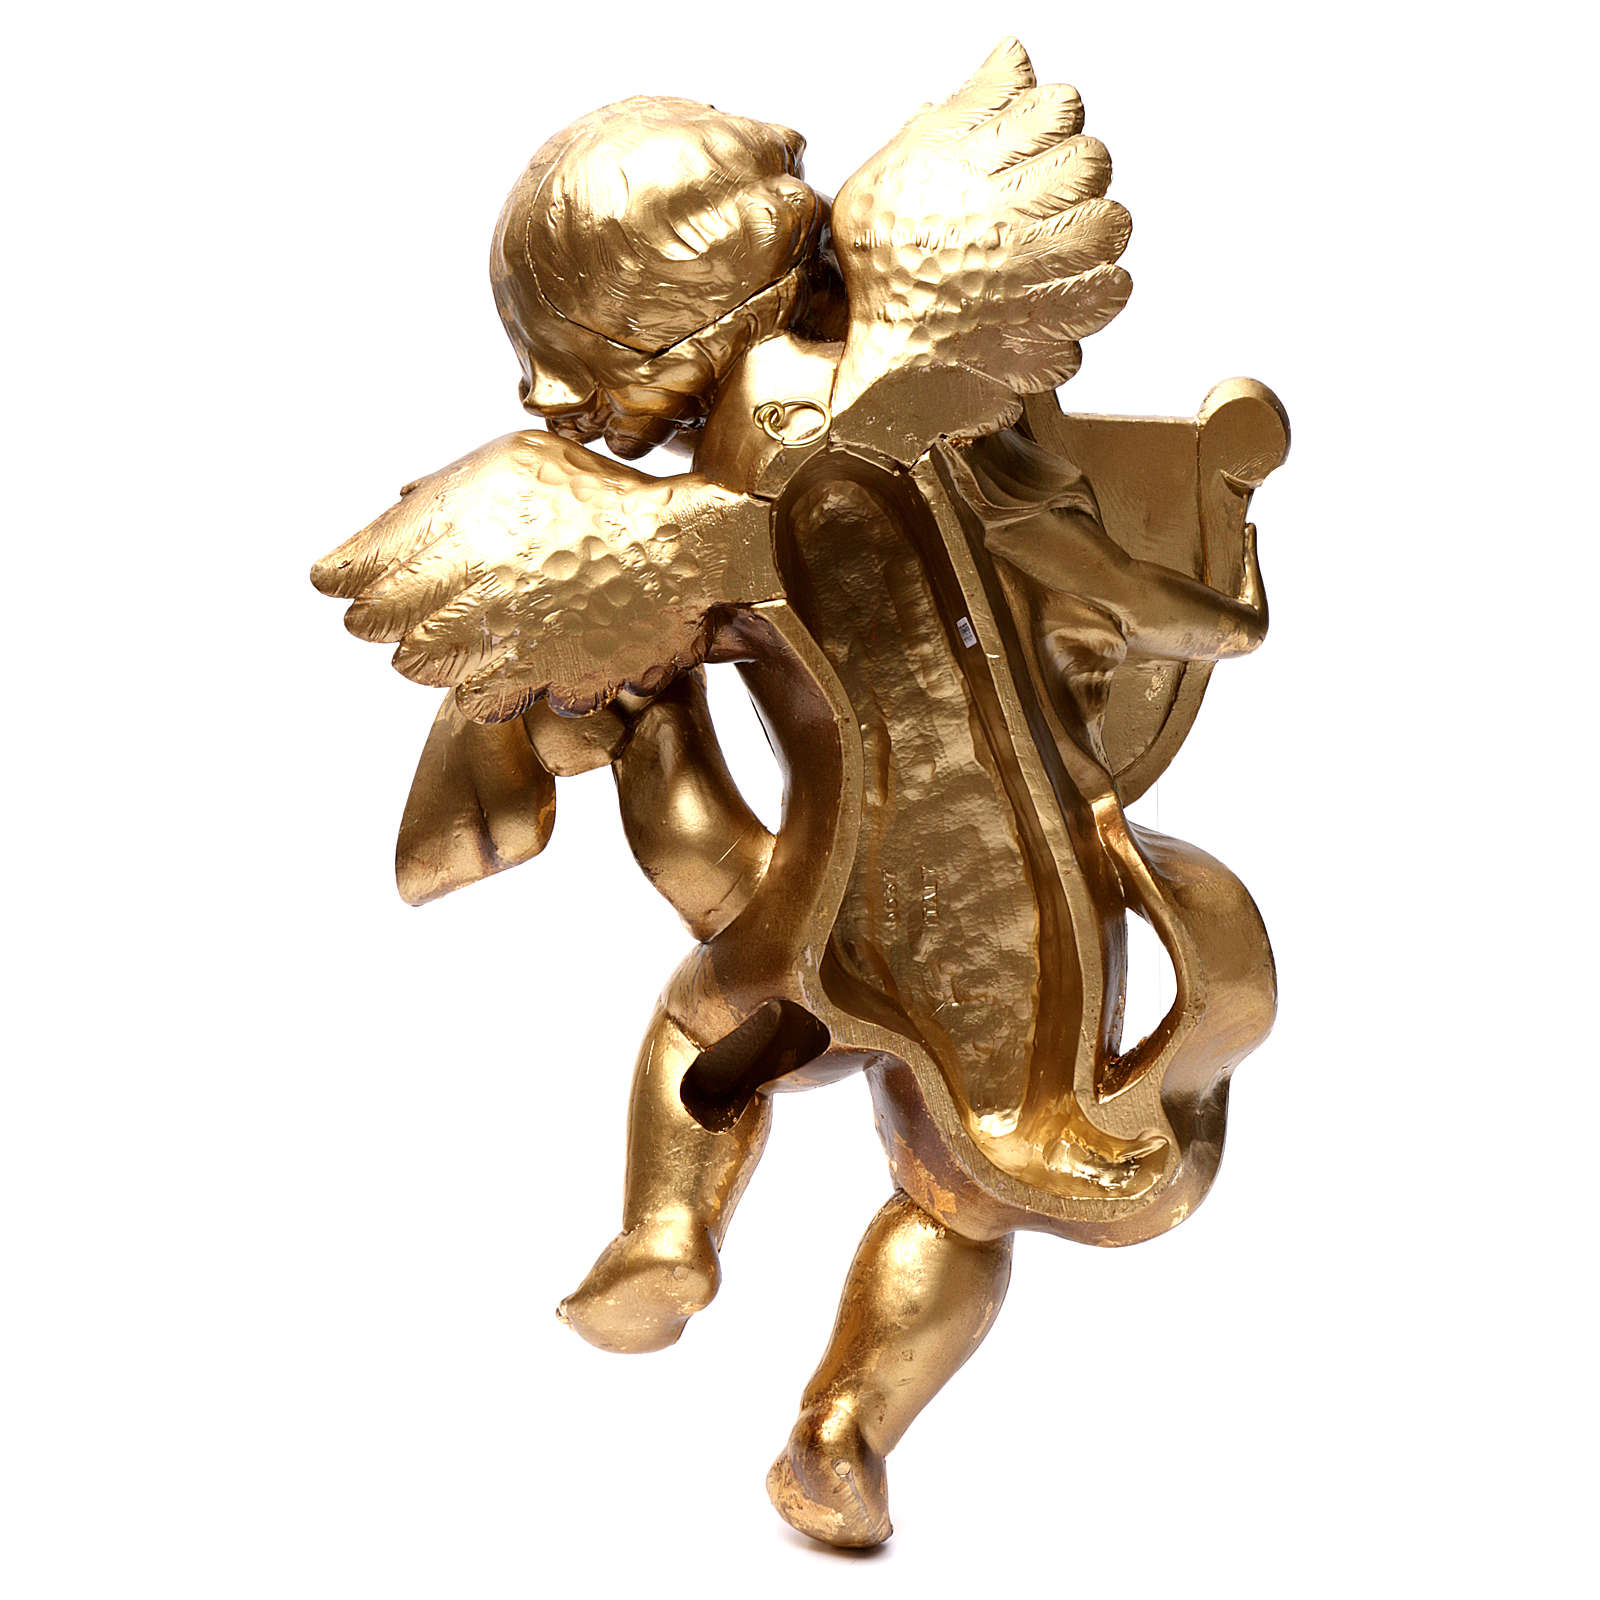 Gilded Angel with Lyre Statue 40 cm | online sales on HOLYART.com